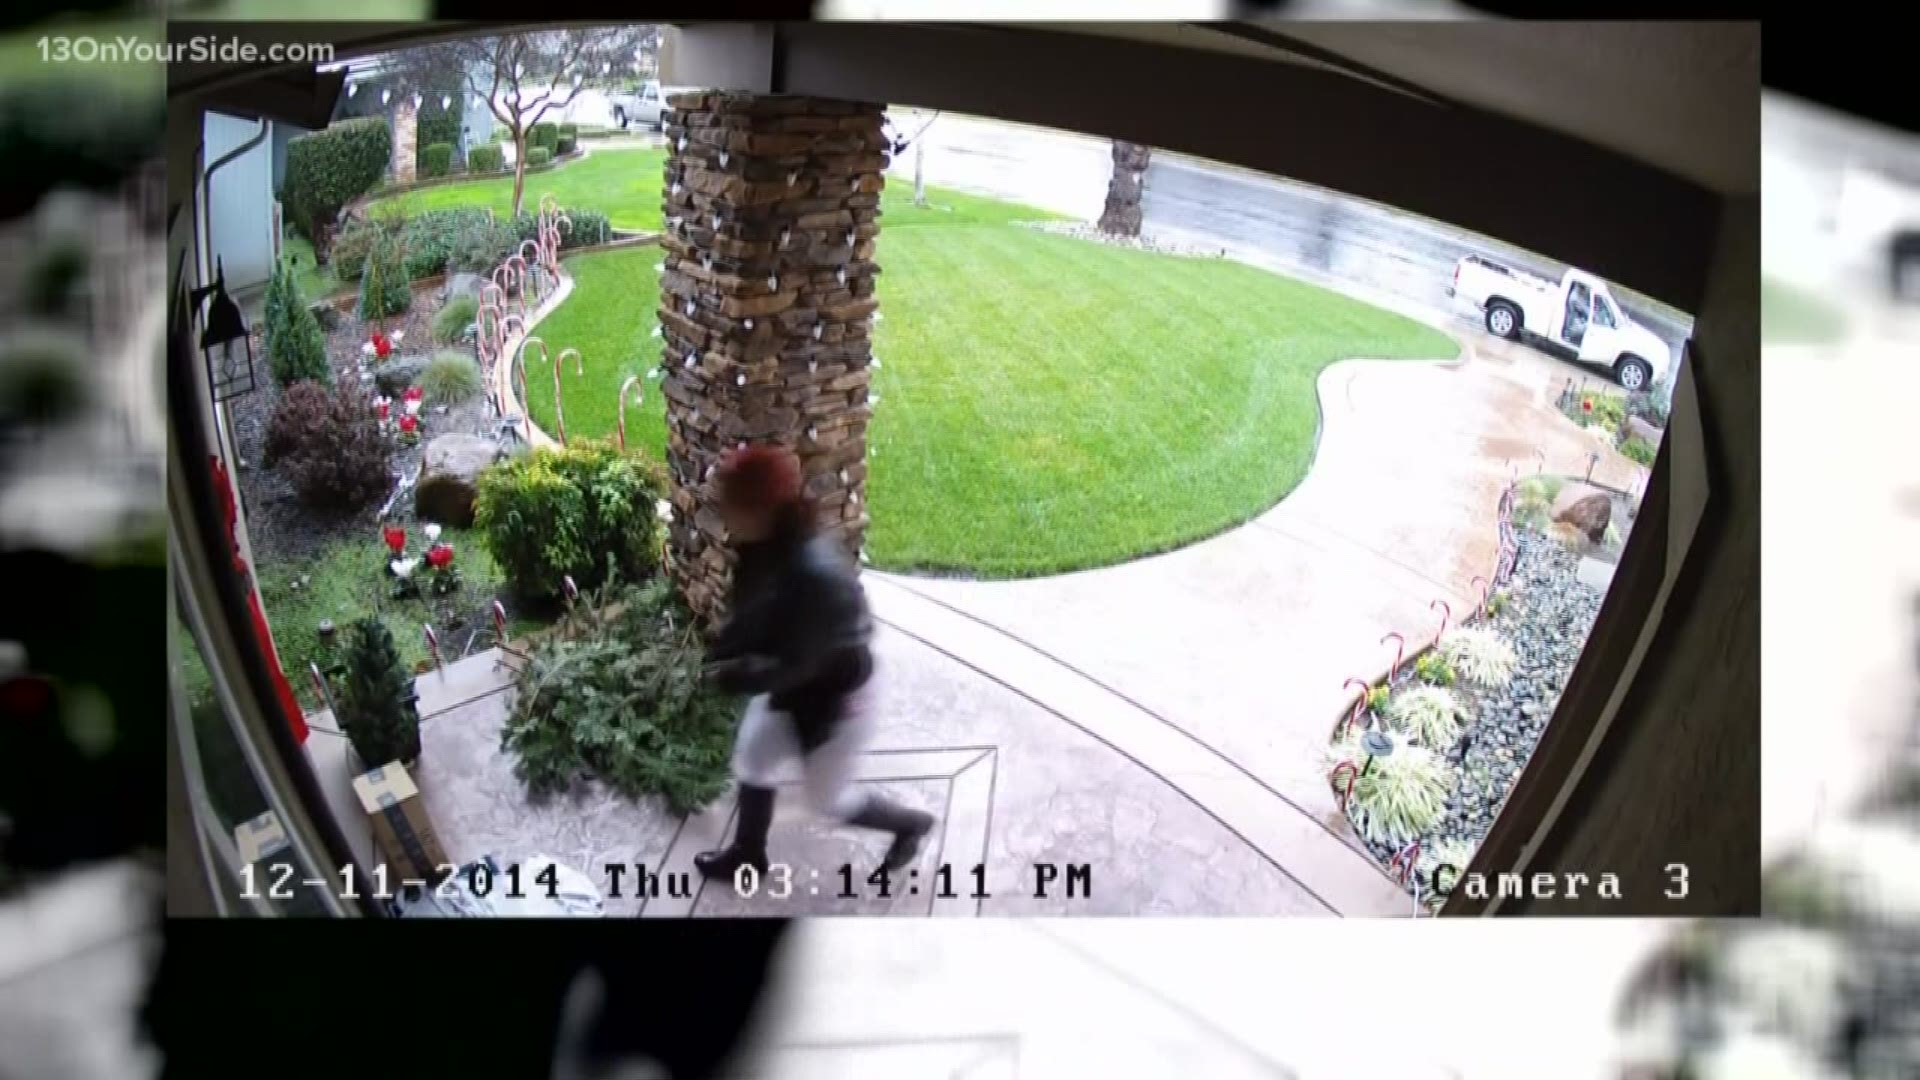 A Michigan law goes into effect on Dec. 16. It is meant to deter porch pirates.